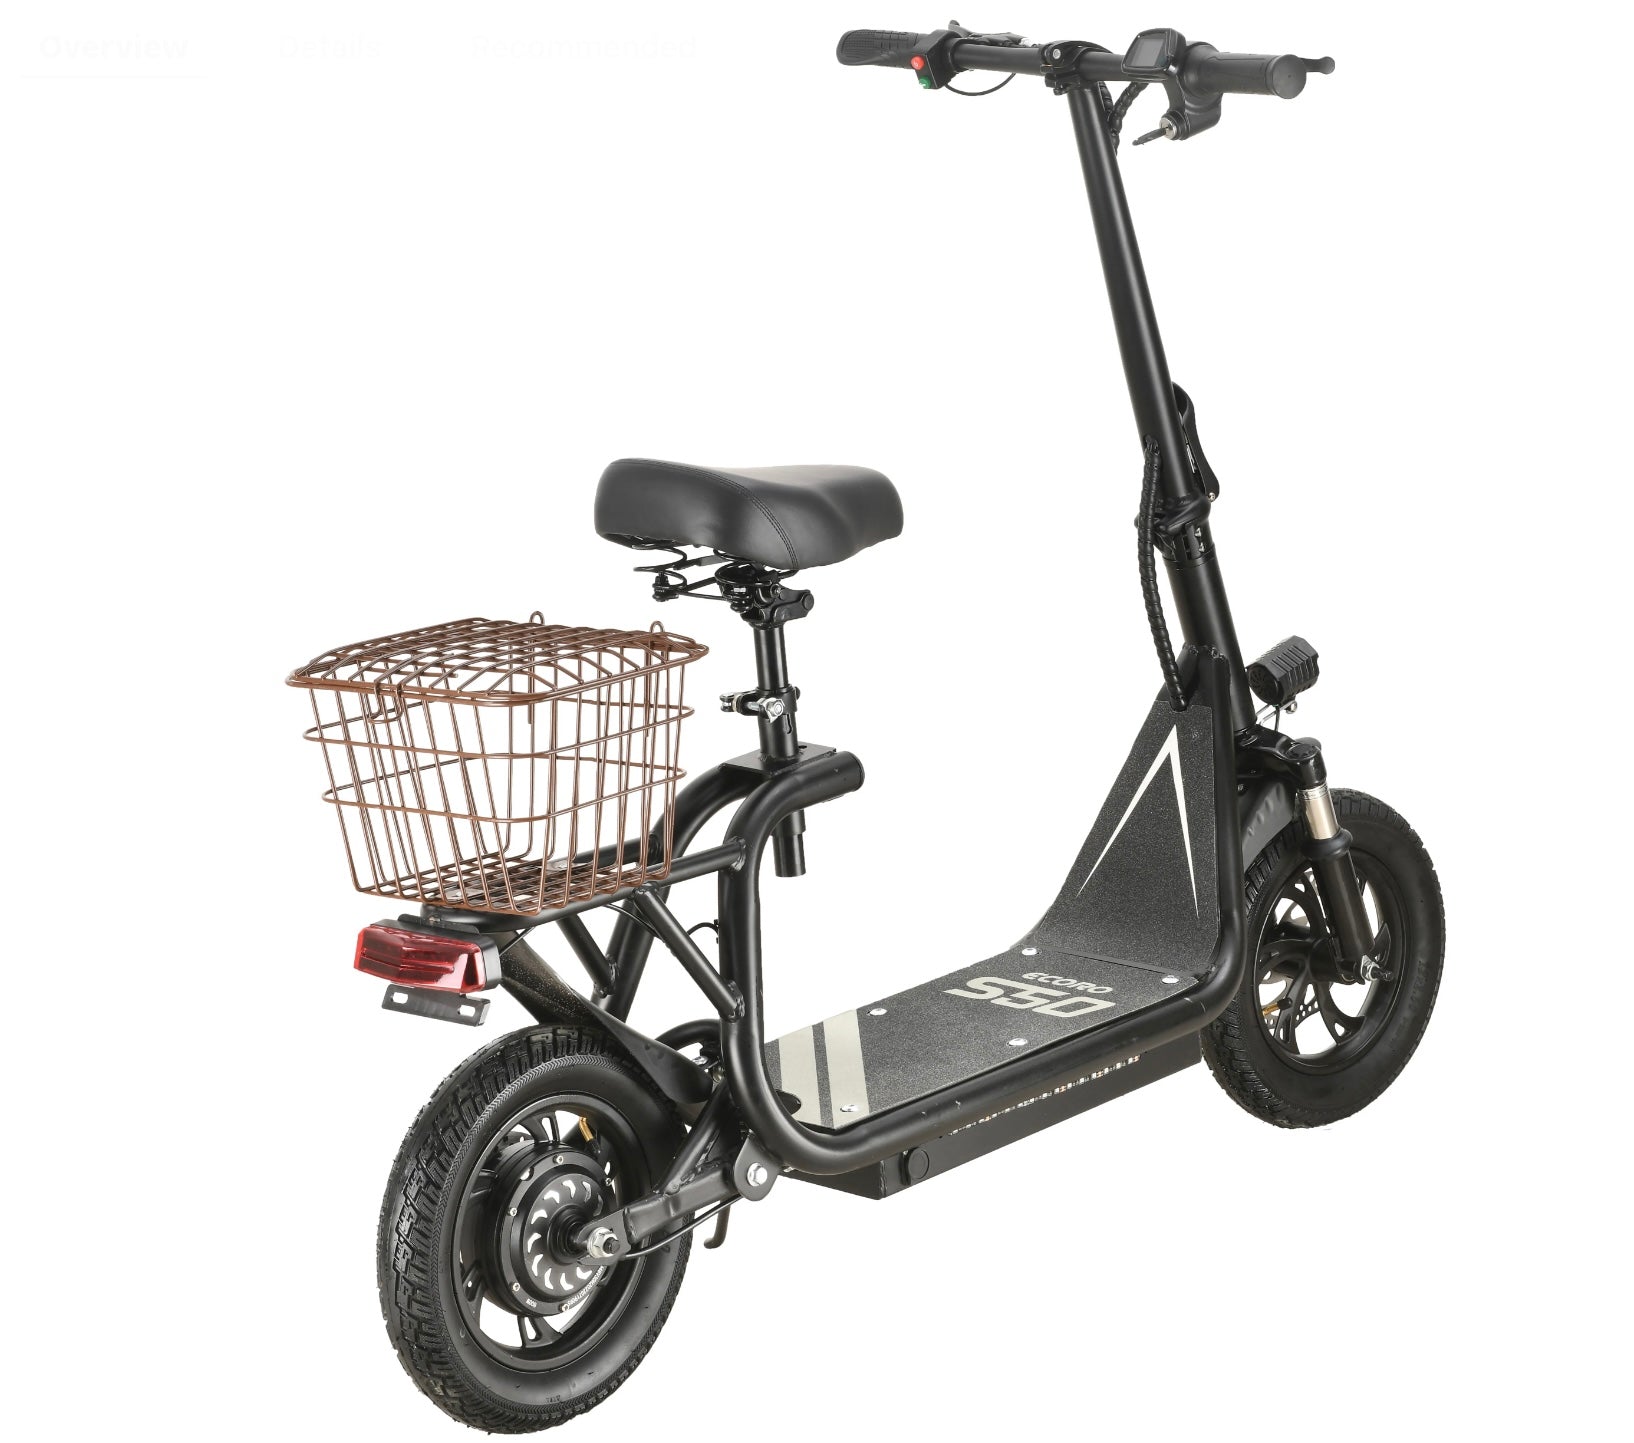 New! Stealth Leisure Rider - Electric Seated Electric Scooter